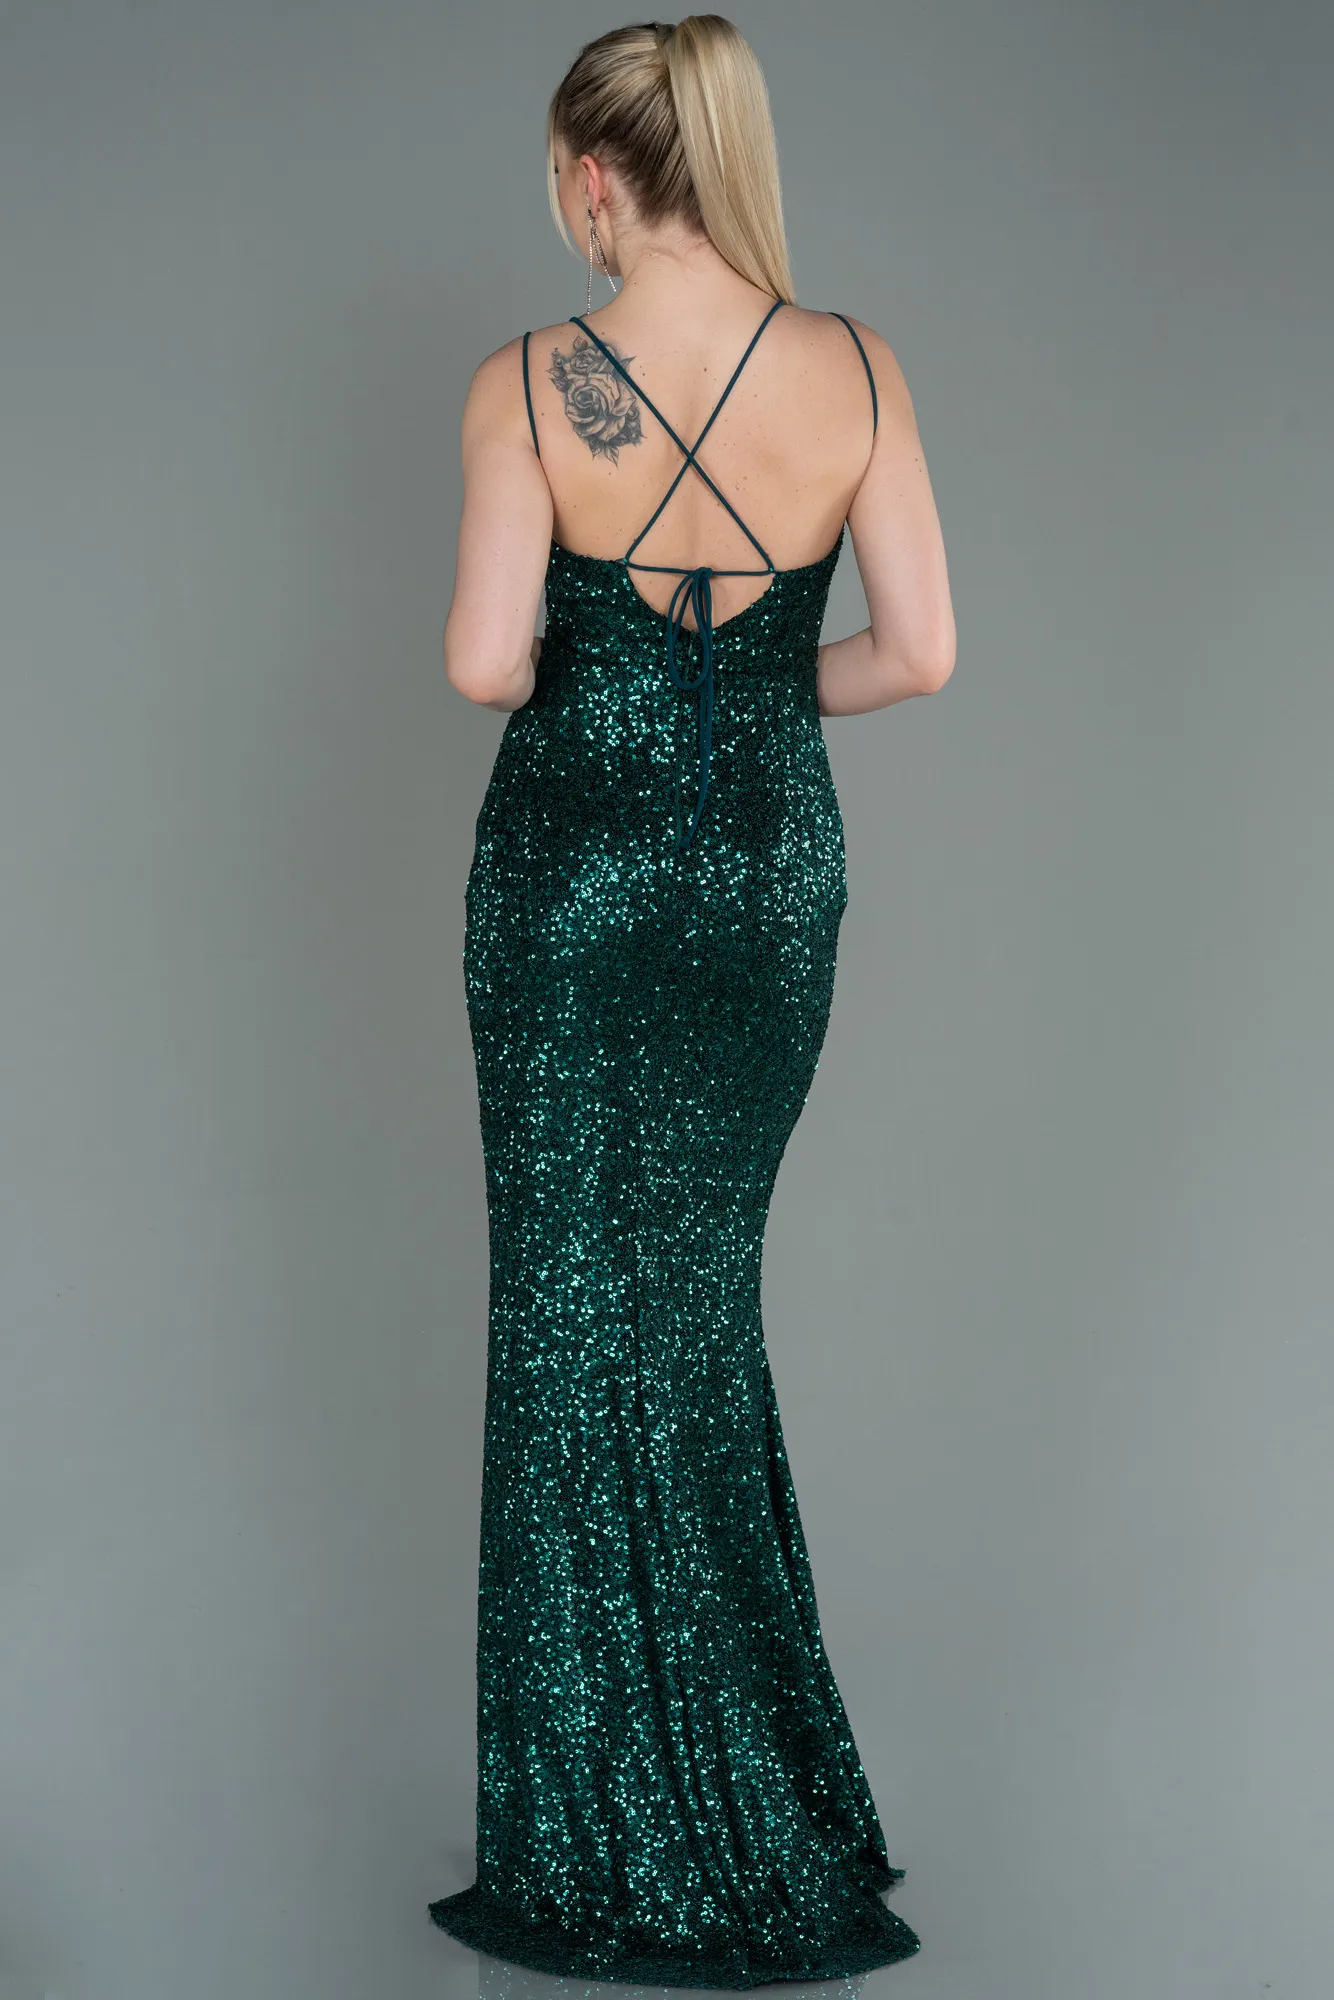 Emerald Green-Long Scaly Prom Gown ABU3118